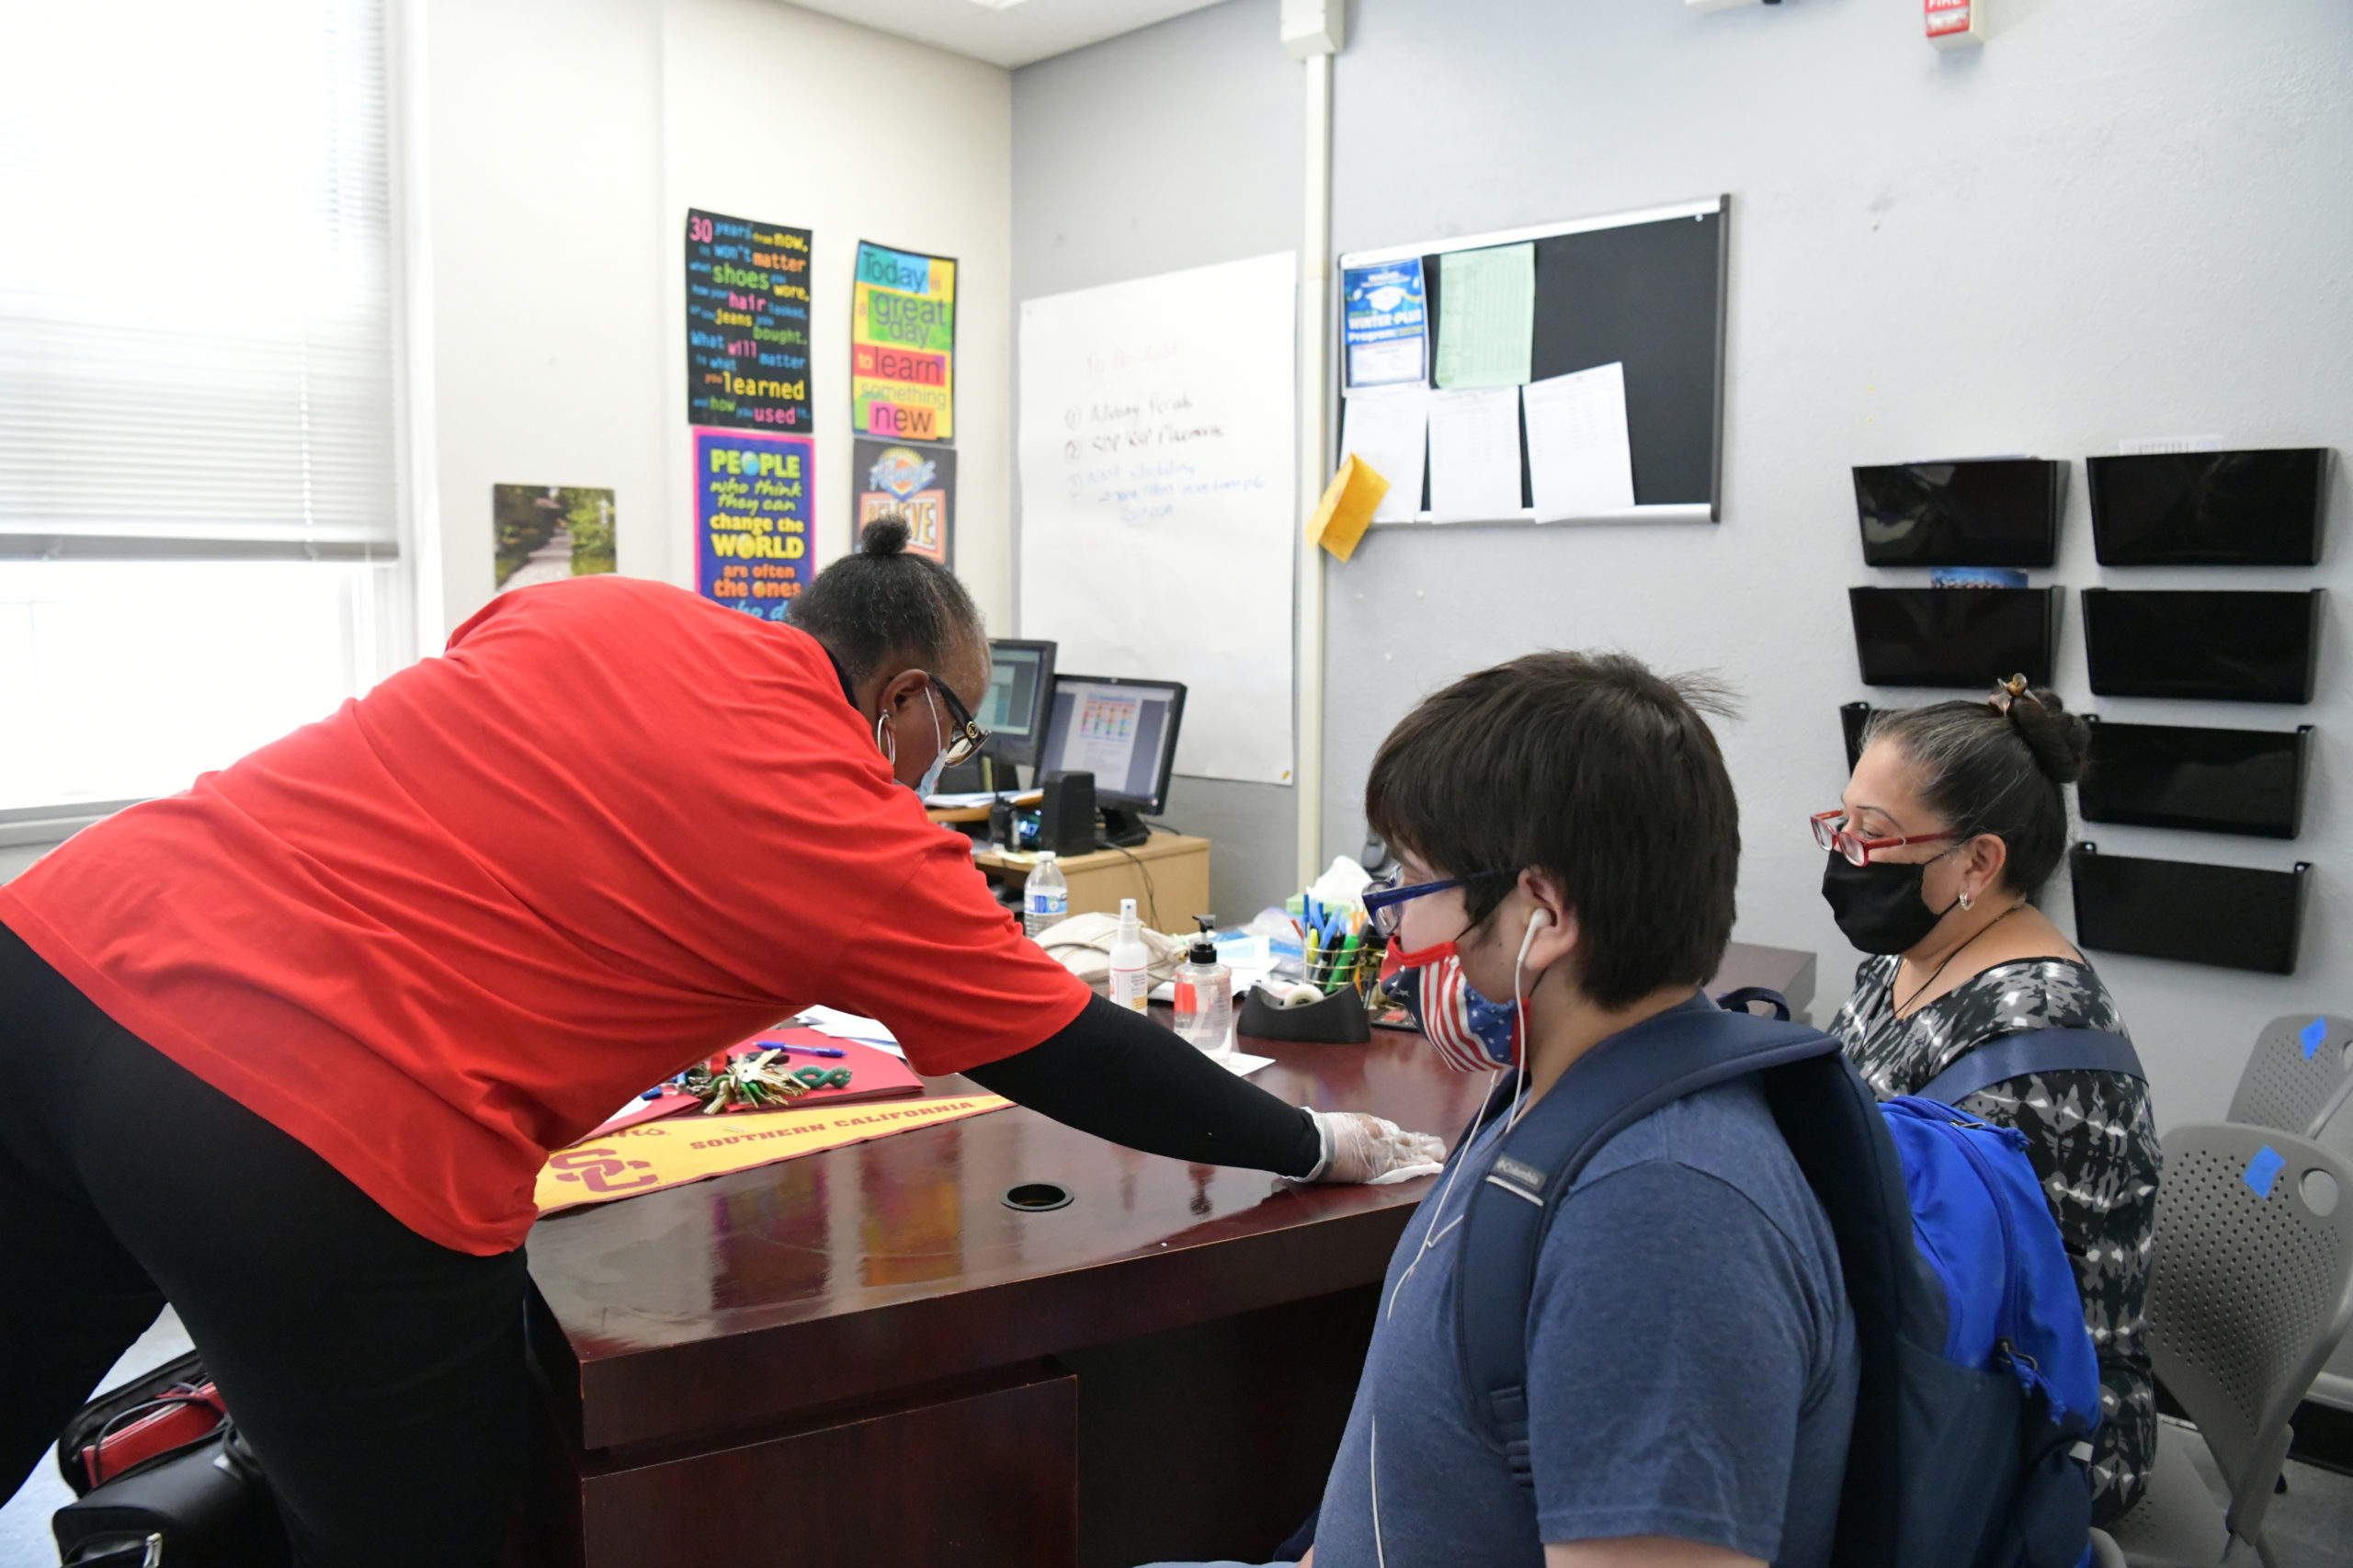 Assistant Principal Catrisa Booker (L) disinfects a desk at Hollywood High School on August 13, 2020 in Hollywood, California. With over 734,000 enrolled students, the Los Angeles Unified School District is the largest public school system in California and the 2nd largest public school district in the United States. With the advent of COVID-19, blended learning, or combined online and classroom learning, will become the norm for the coming school year. (Photo by Rodin Eckenroth/Getty Images)